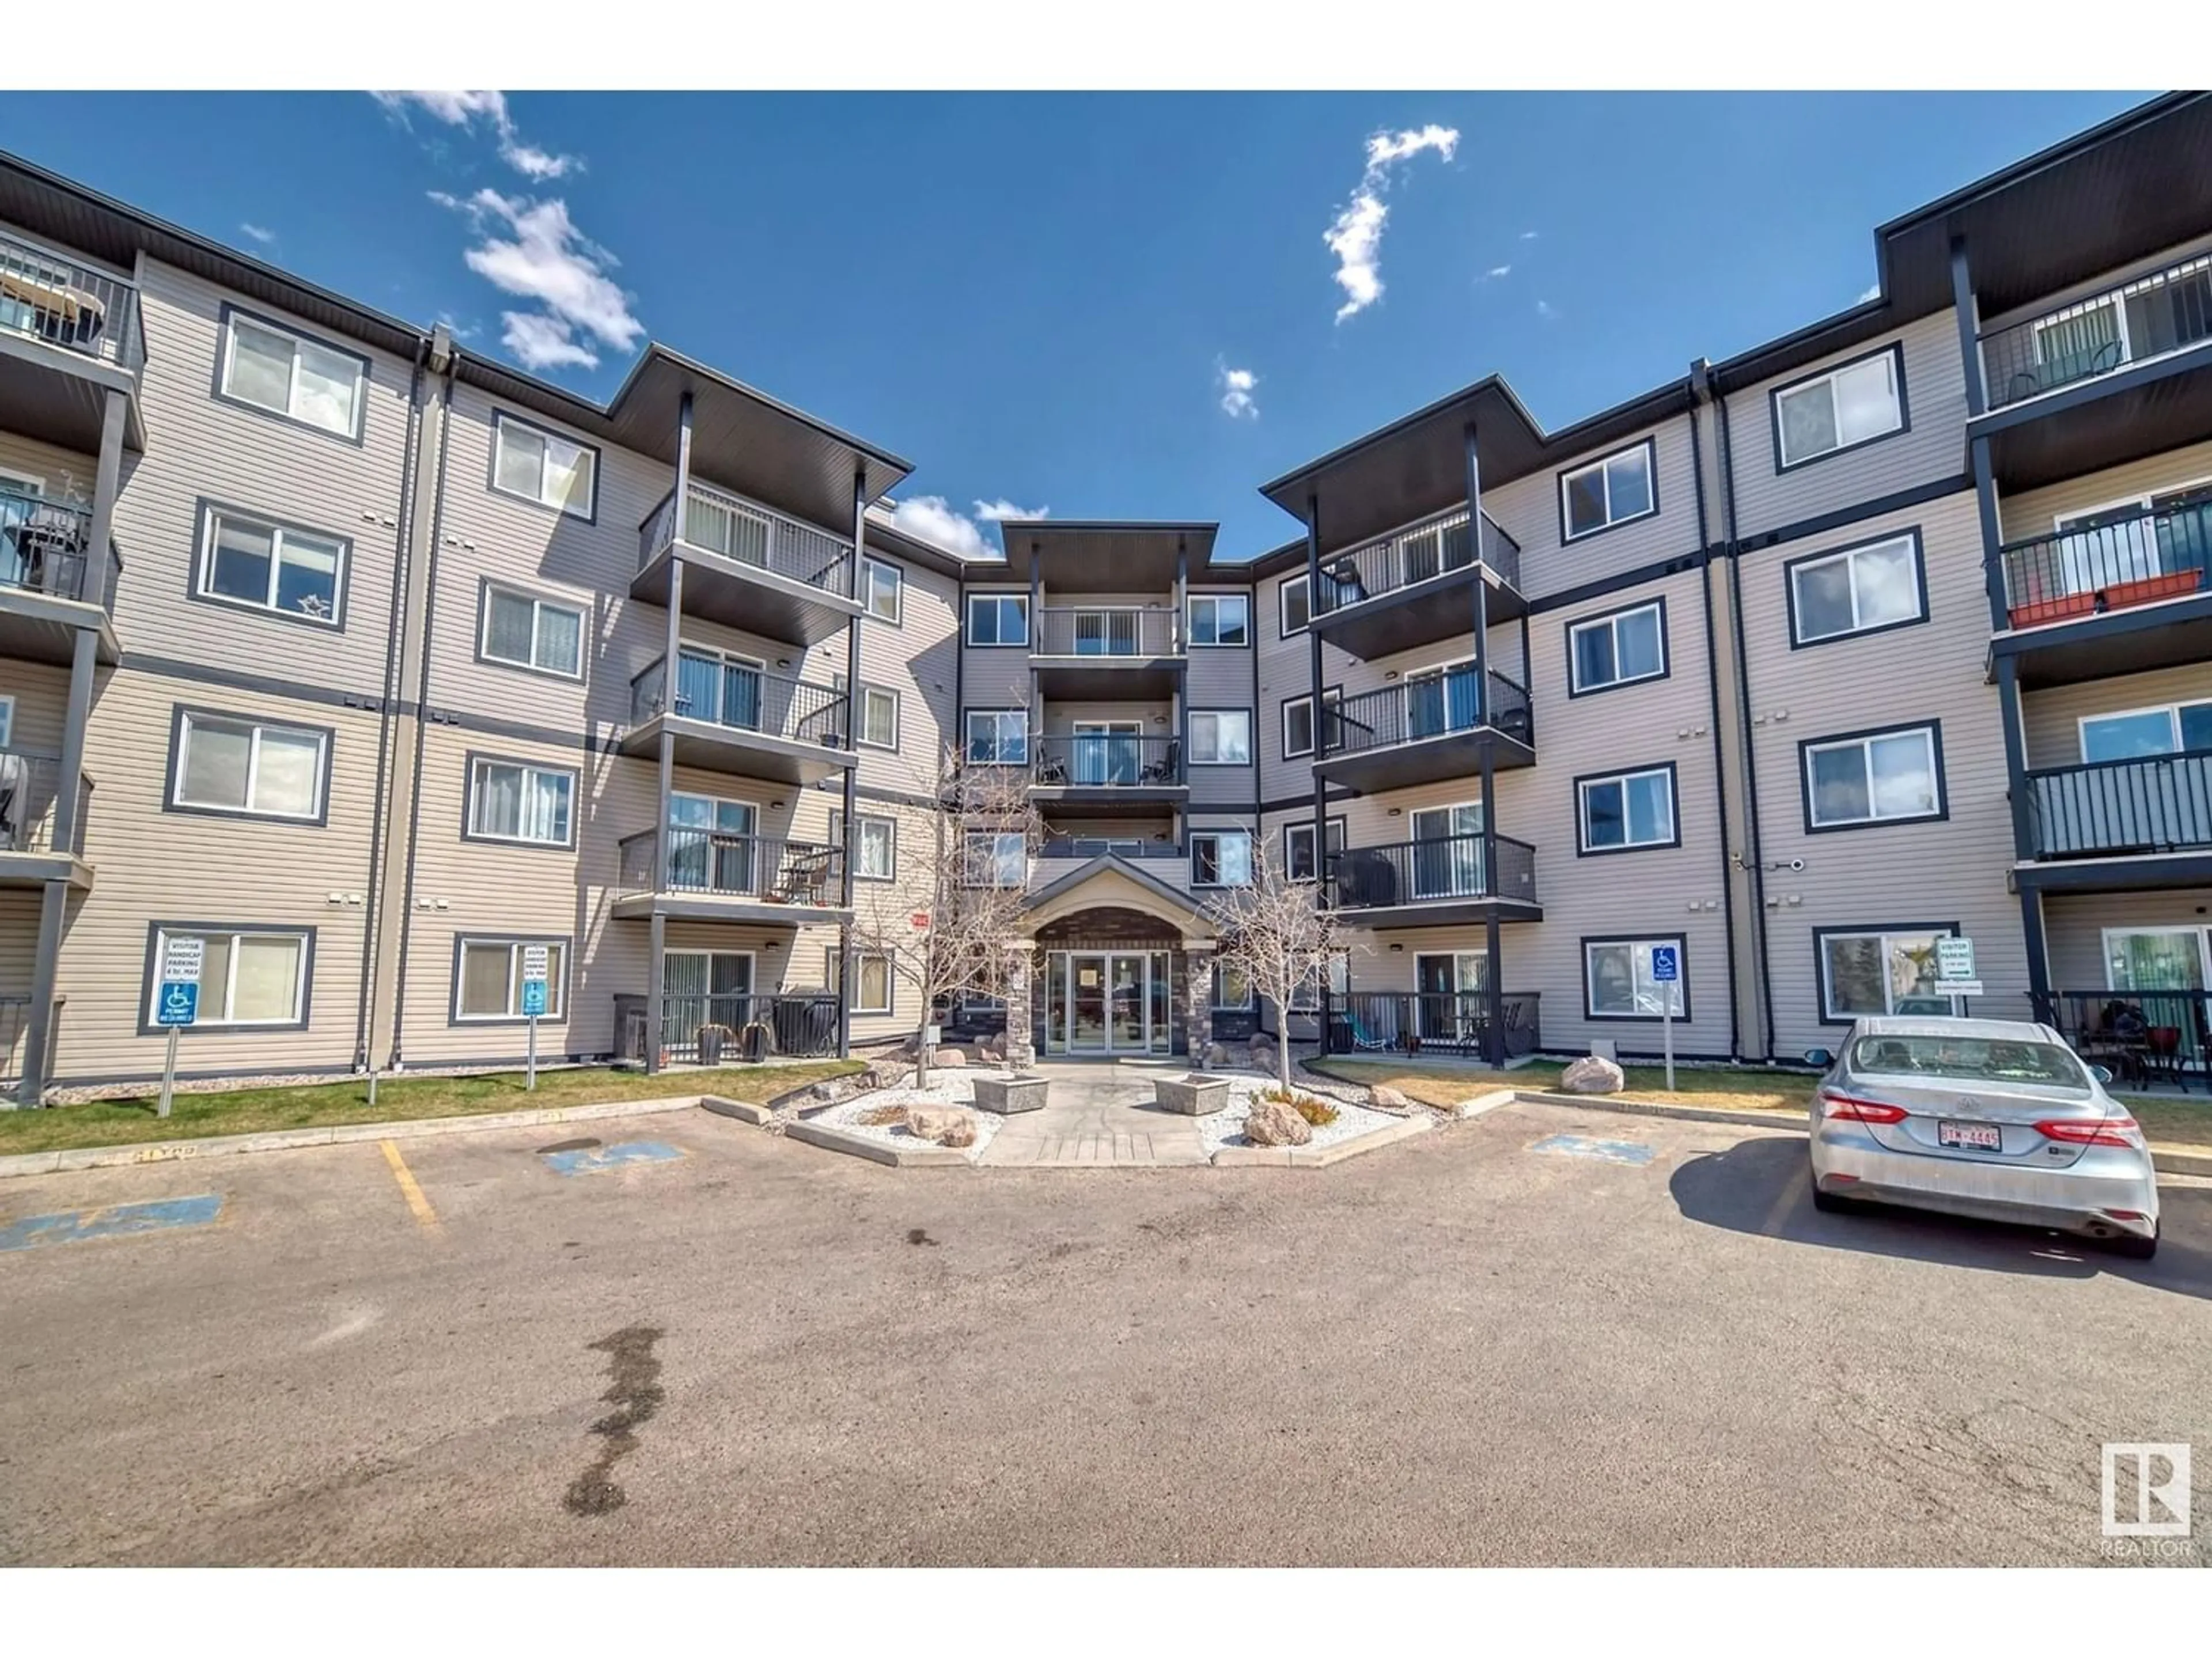 A pic from exterior of the house or condo for #118 5951 165 AV NW, Edmonton Alberta T5Y0J6